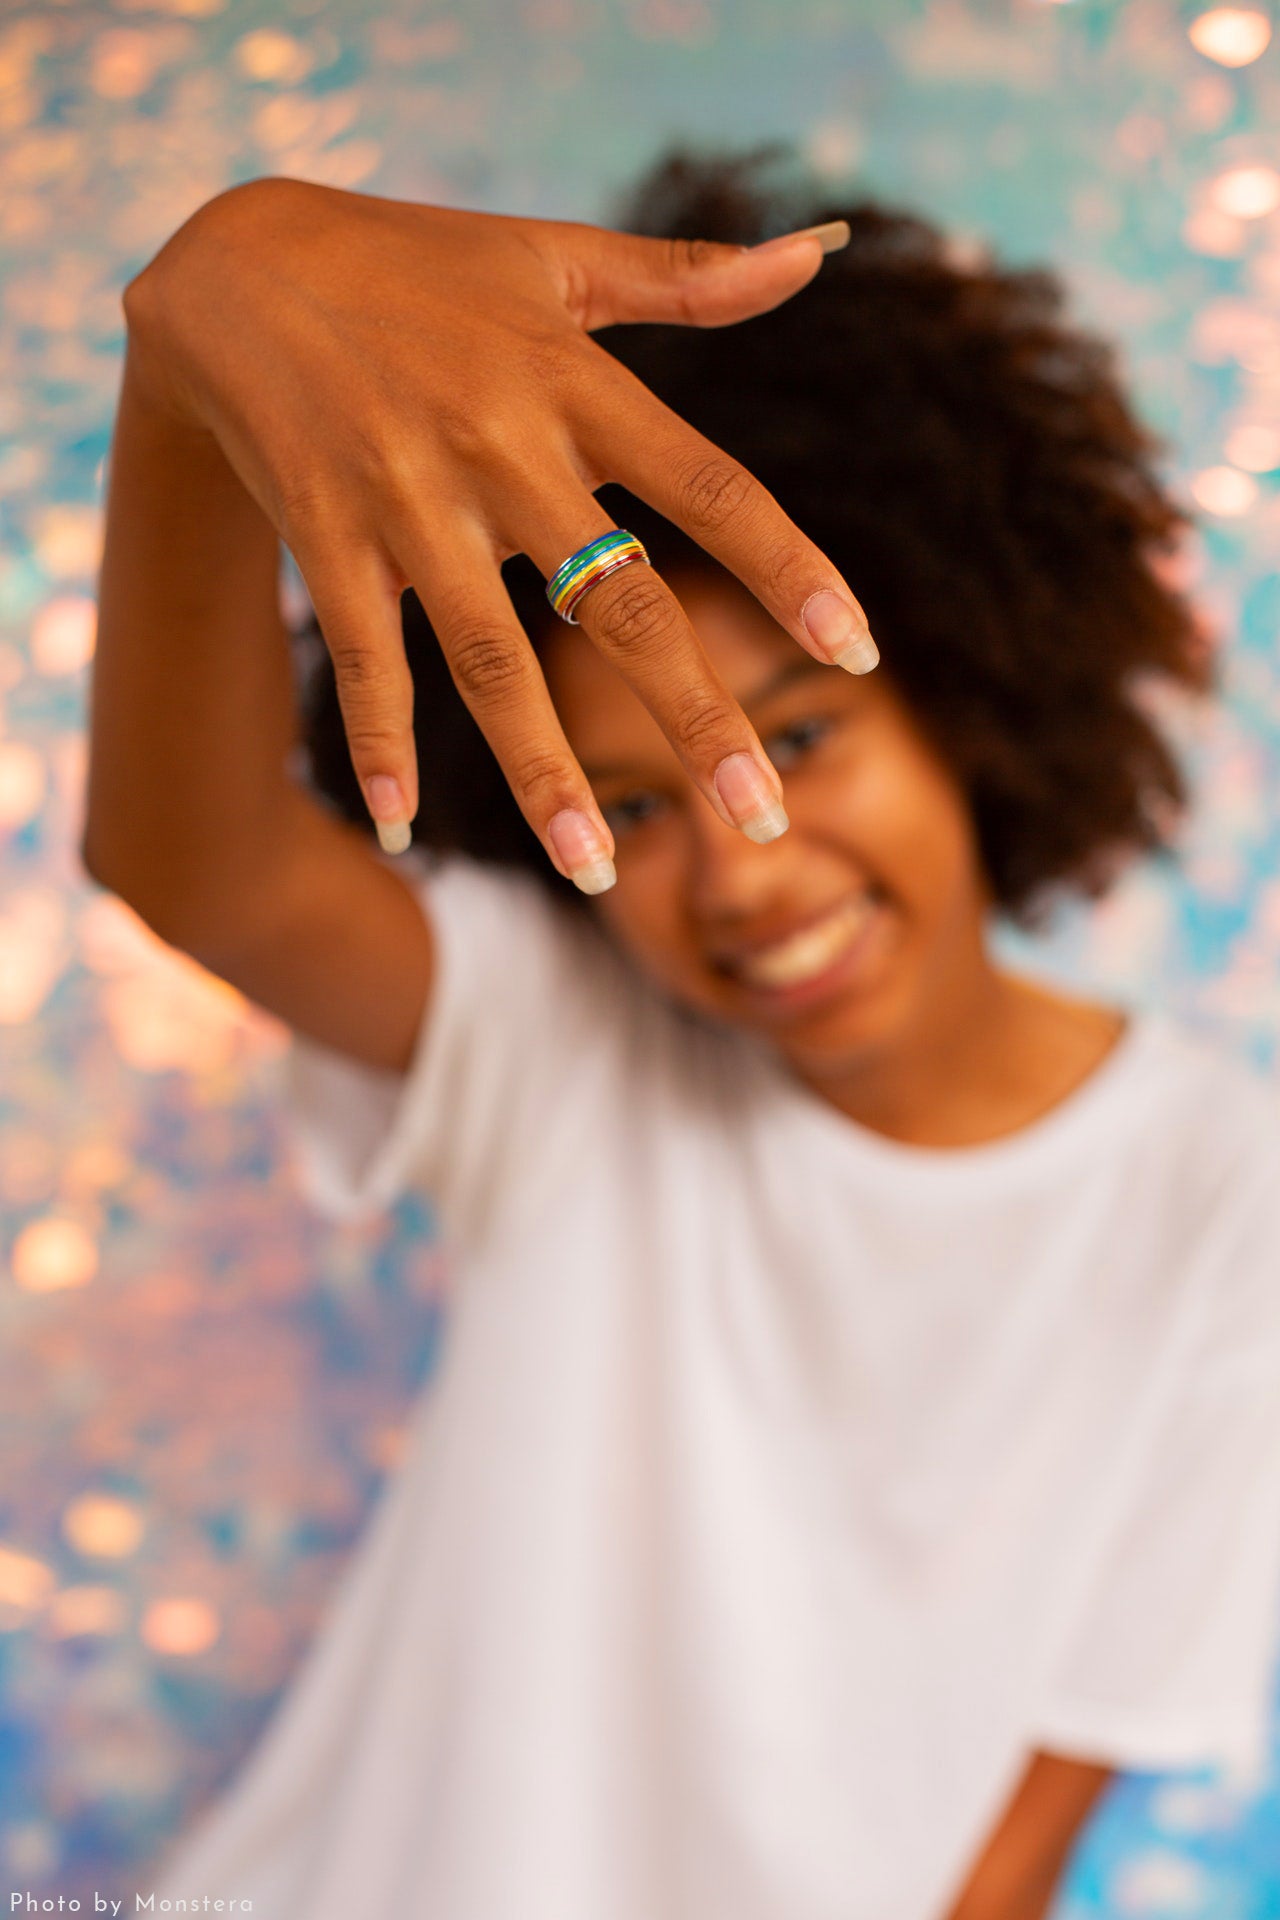 Woman showing hand with rainbow pride ring